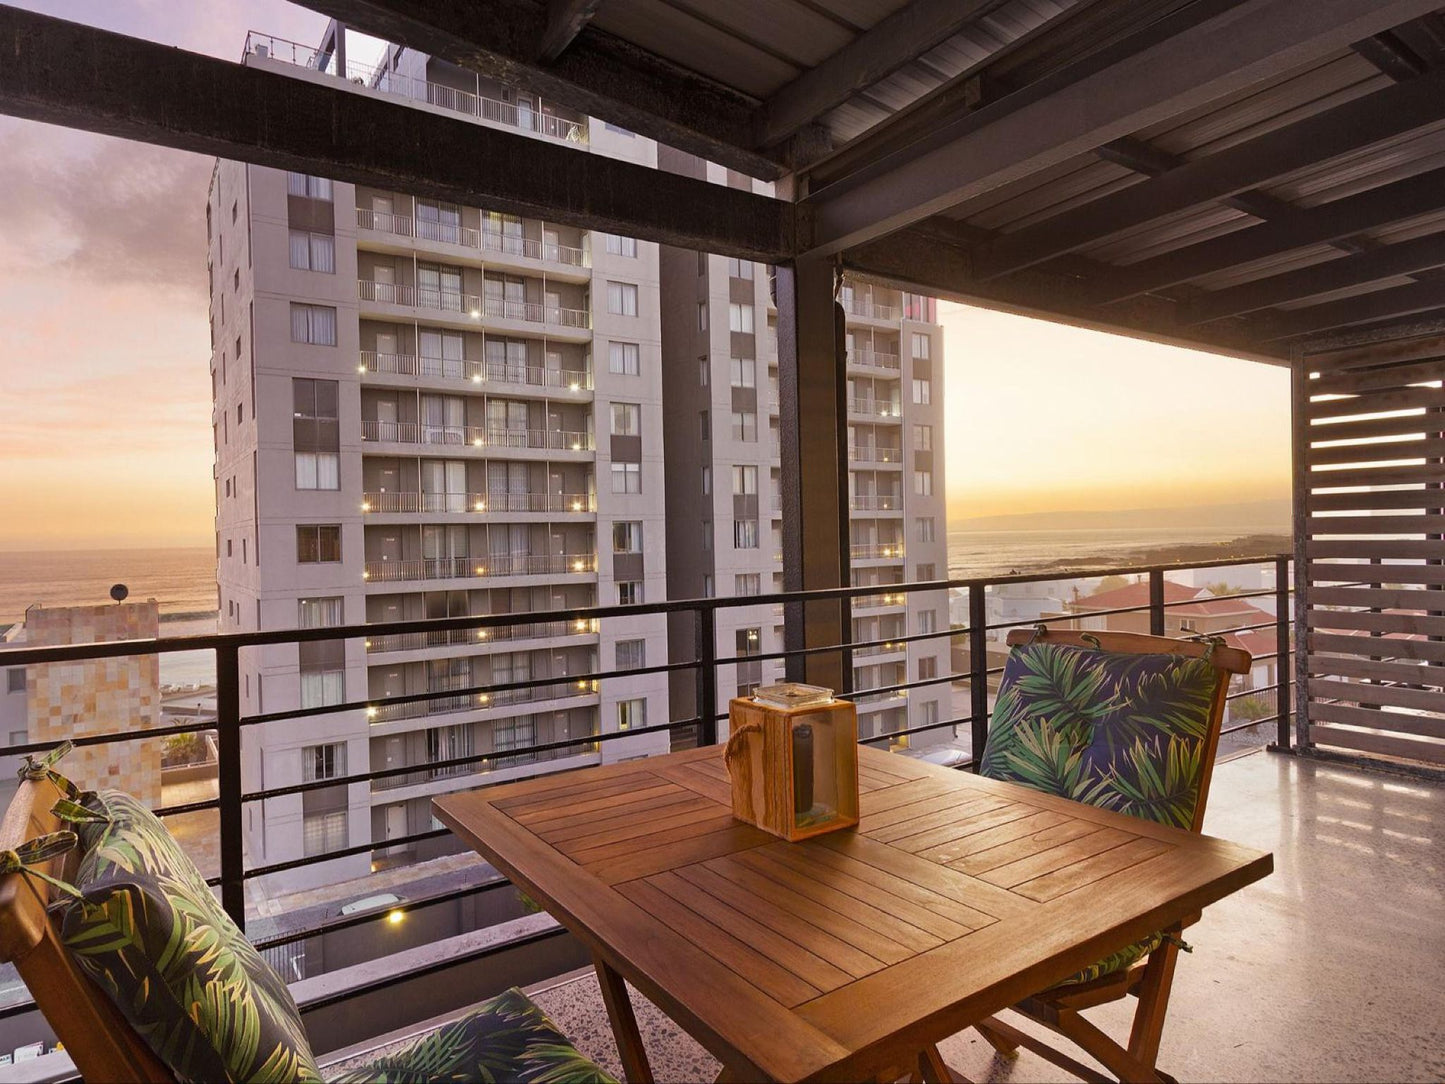 Manhattan On Coral 28 By Hostagents West Beach Blouberg Western Cape South Africa Balcony, Architecture